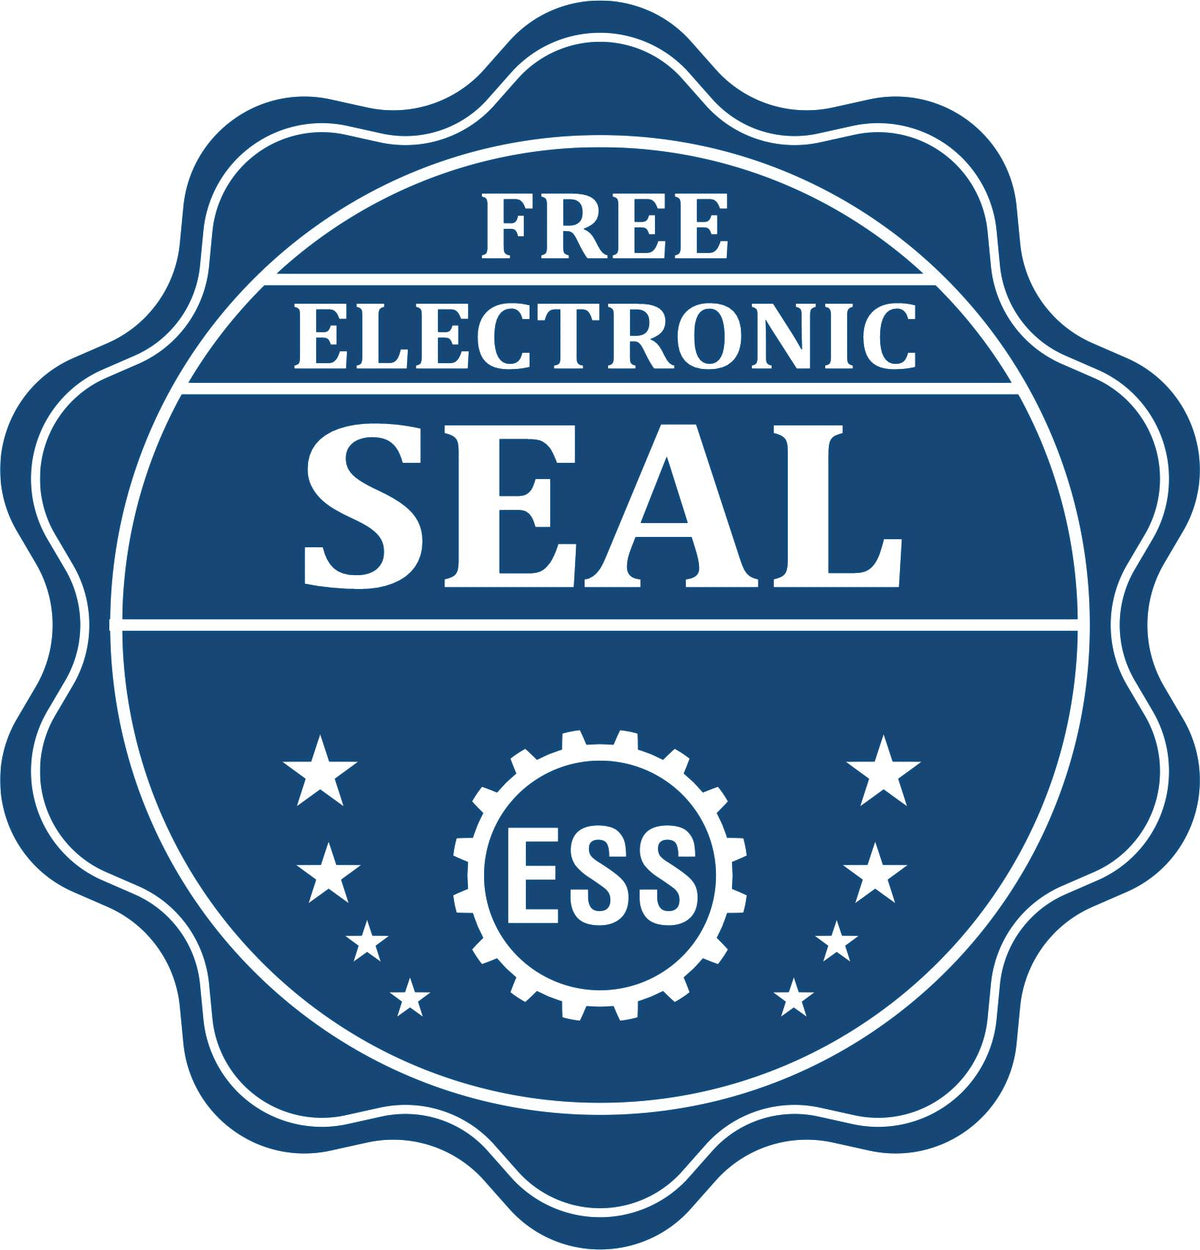 A badge showing a free electronic seal for the Handheld Guam Professional Engineer Embosser with stars and the ESS gear on the emblem.